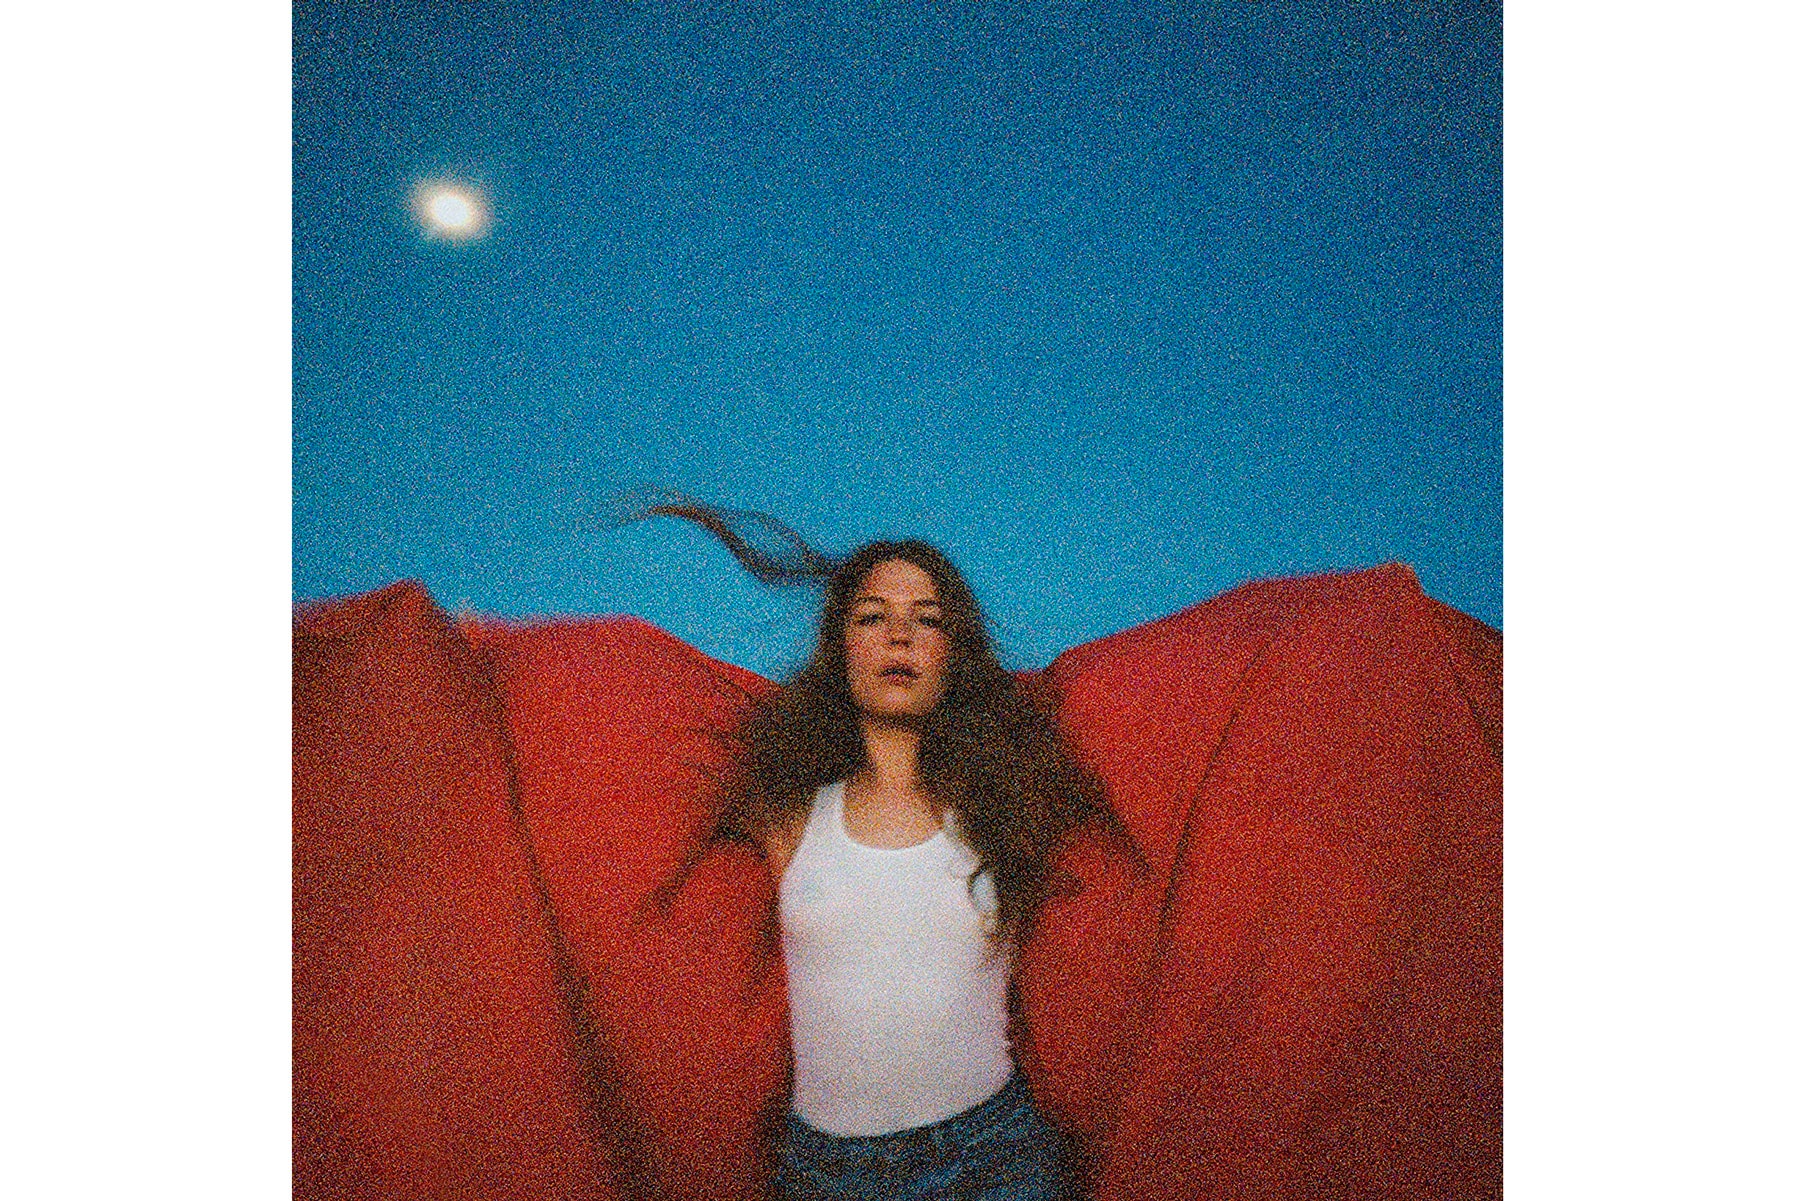 Maggie Rogers 'Heard It in a Past Life' Stream albums pharrell williams 